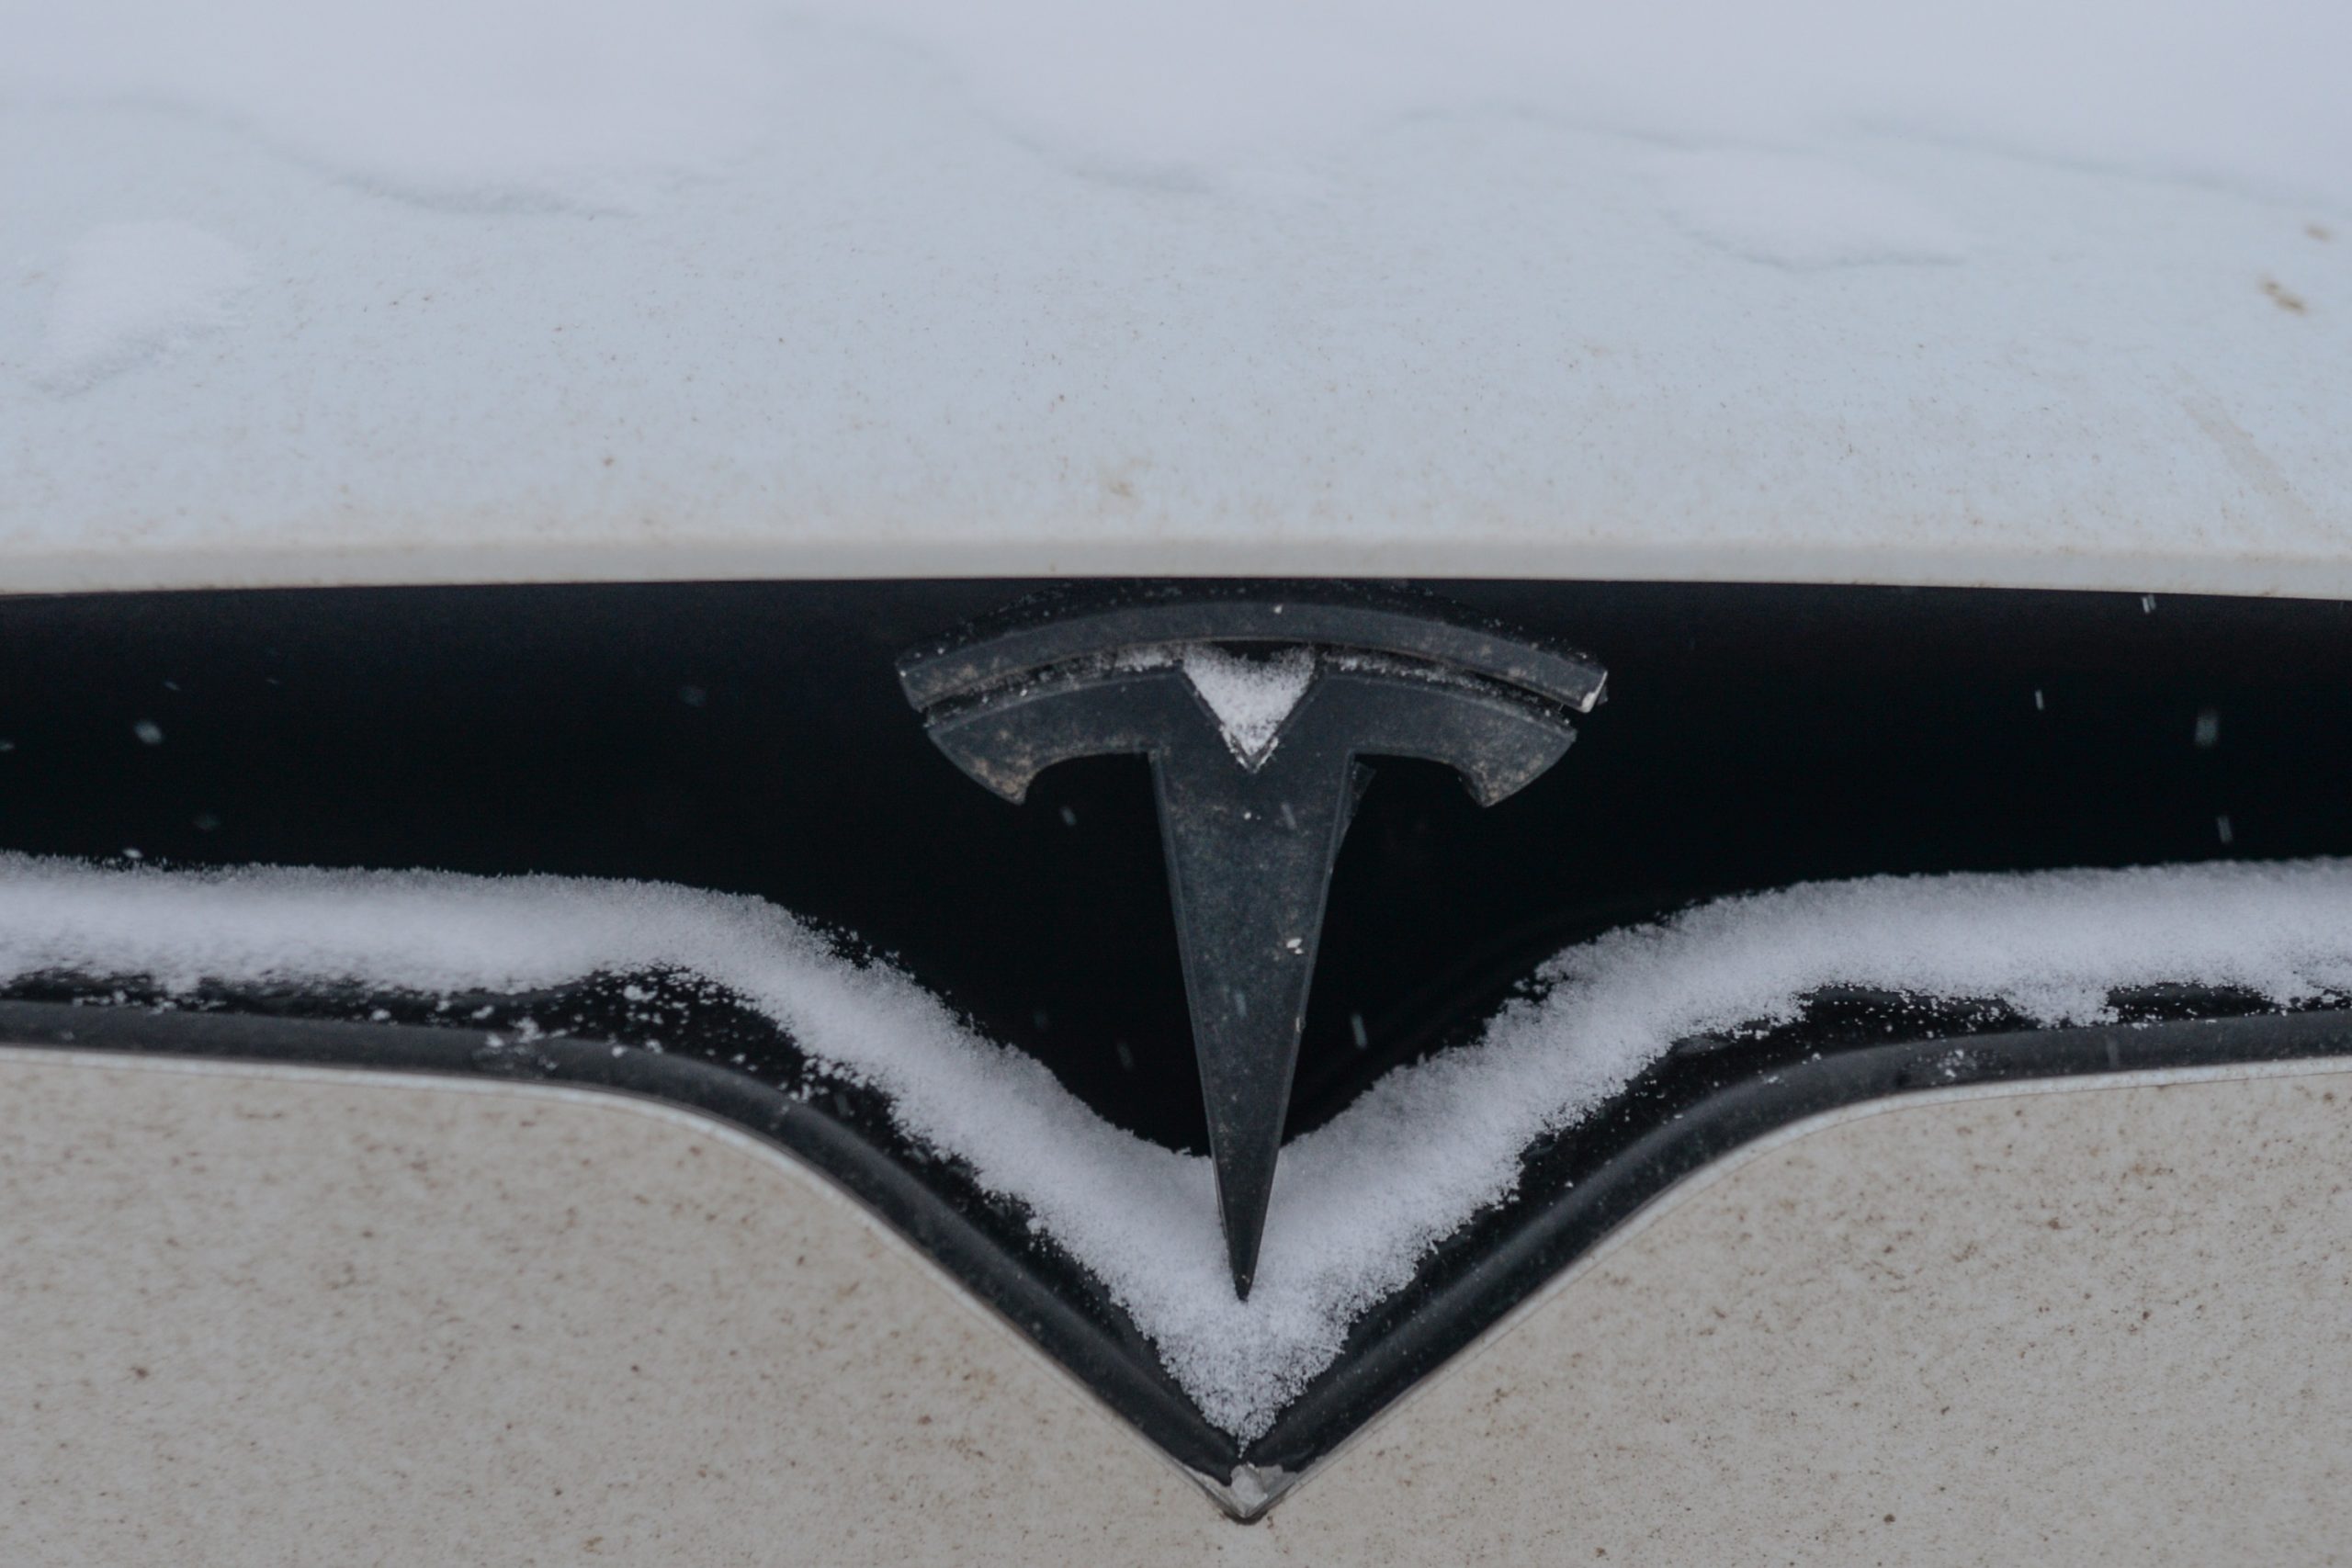 A Tesla logo covered in snow on a Model 3